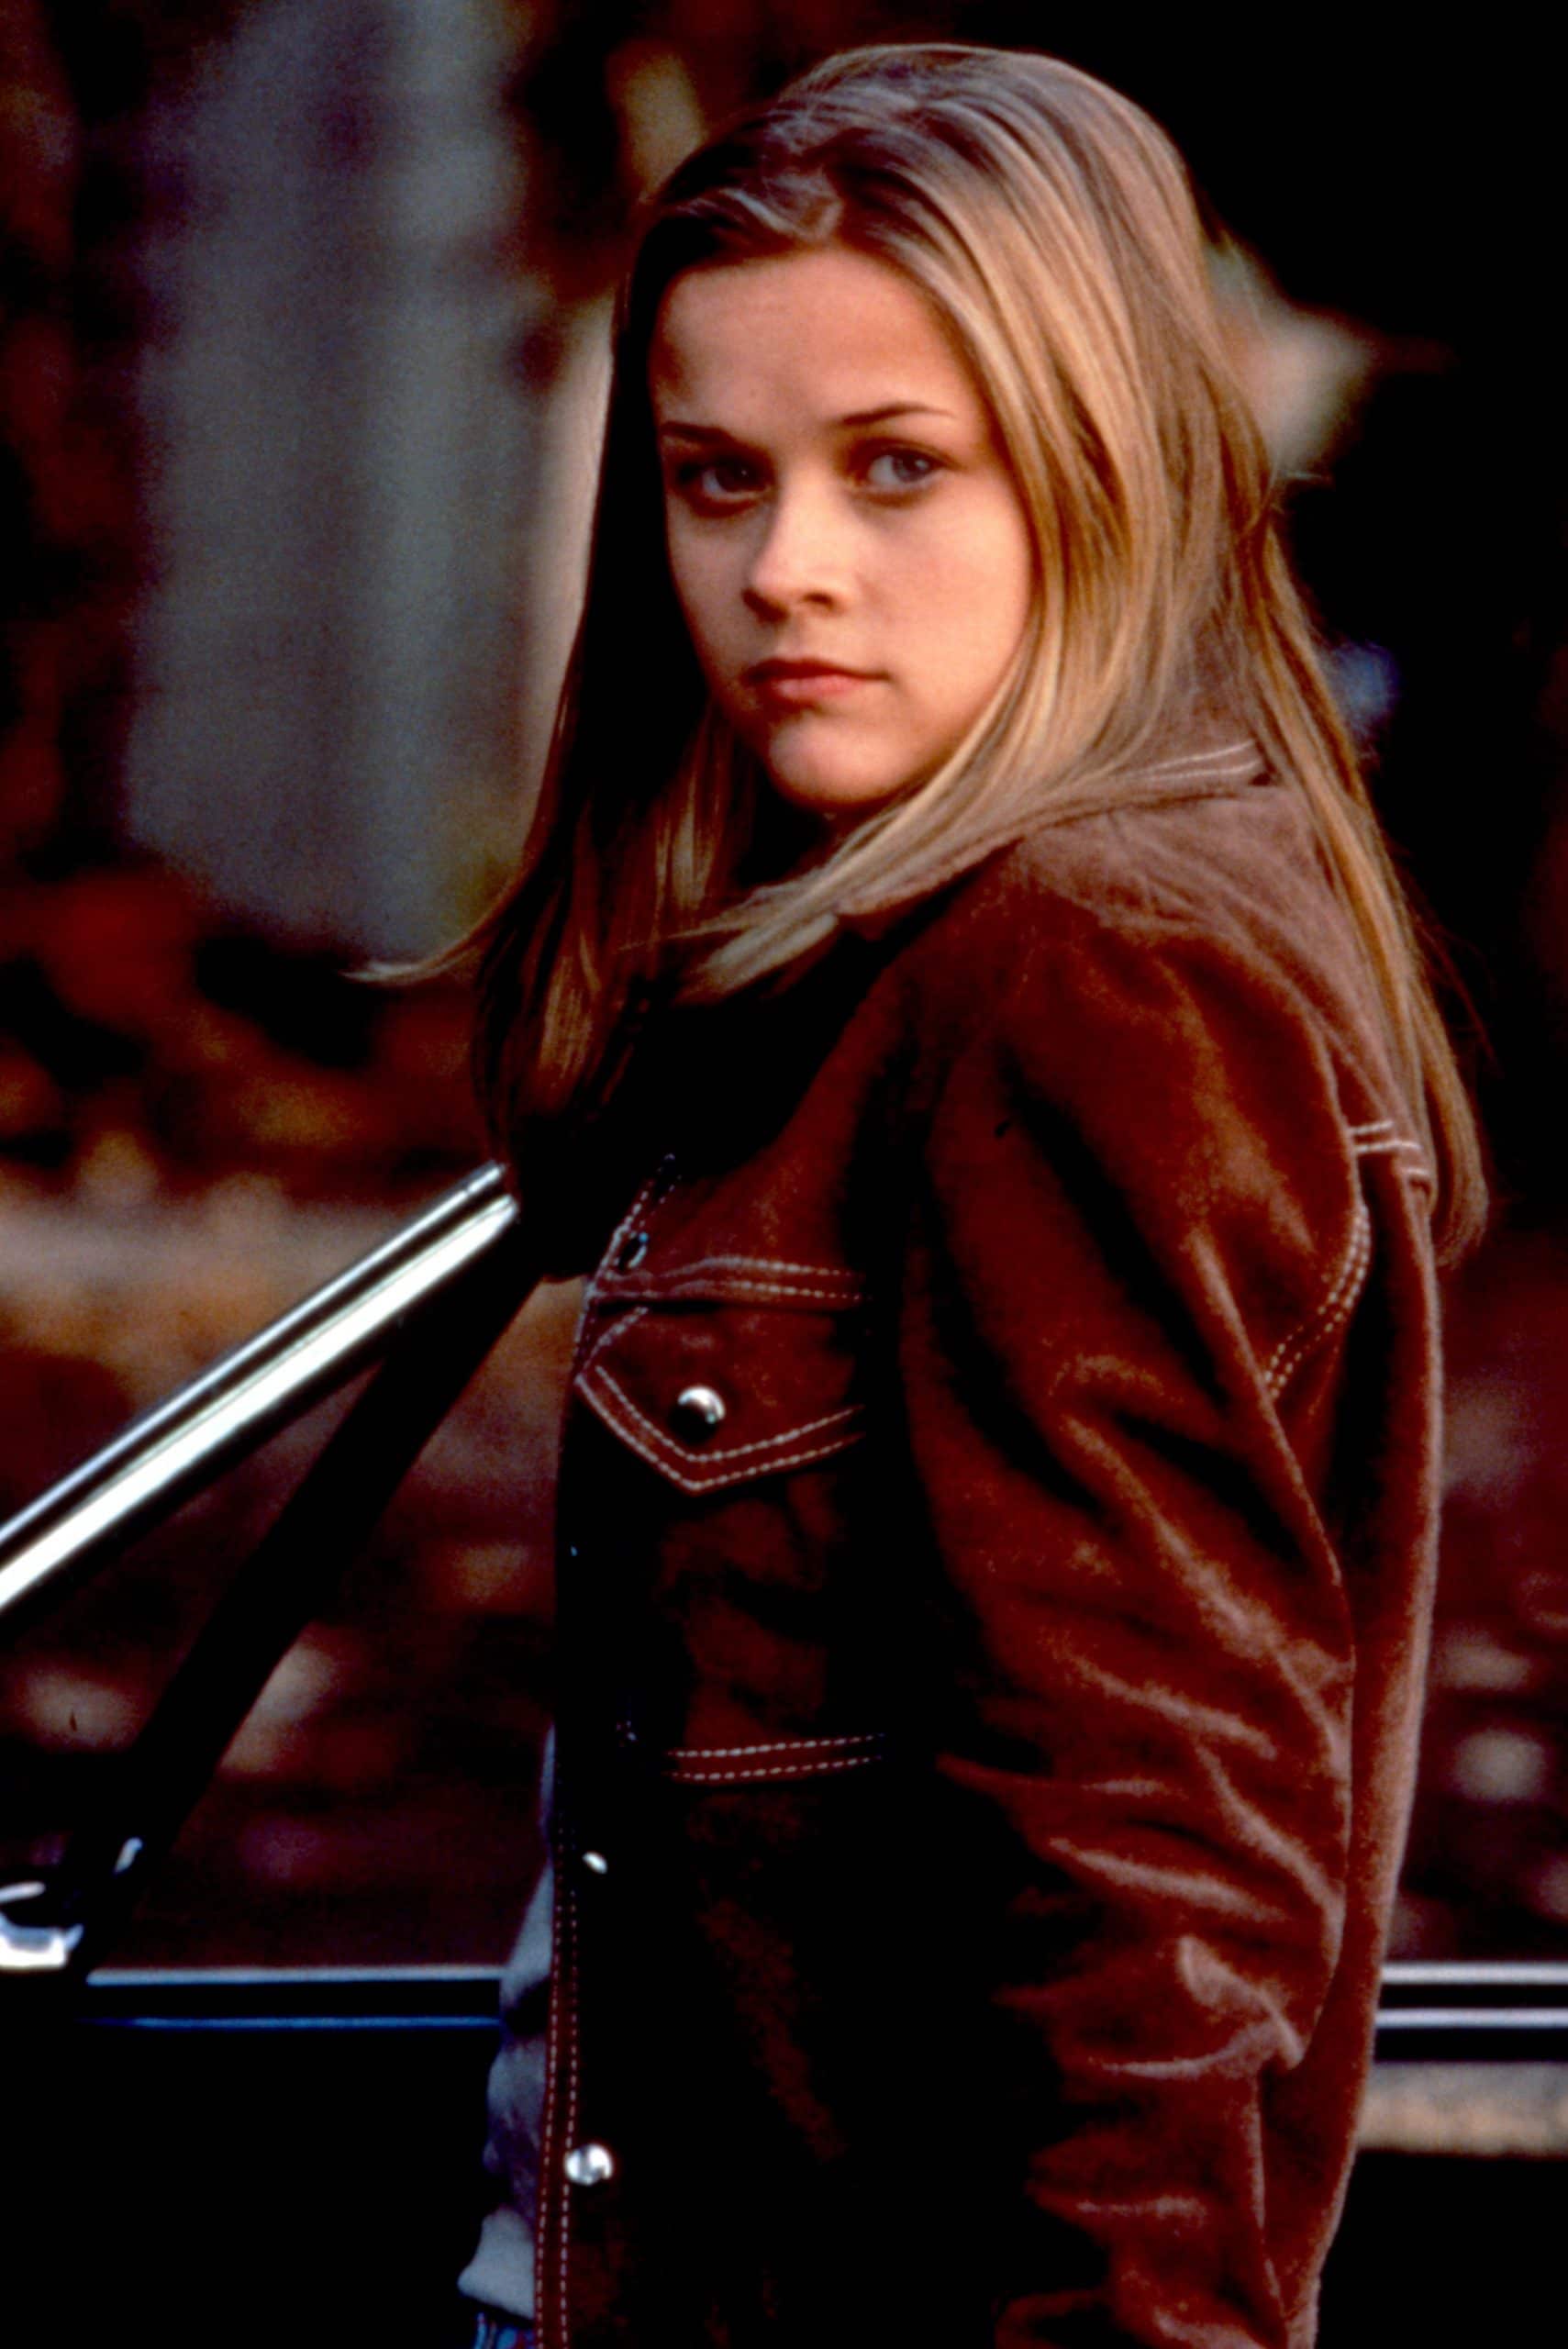 FEAR, Reese Witherspoon, 1996